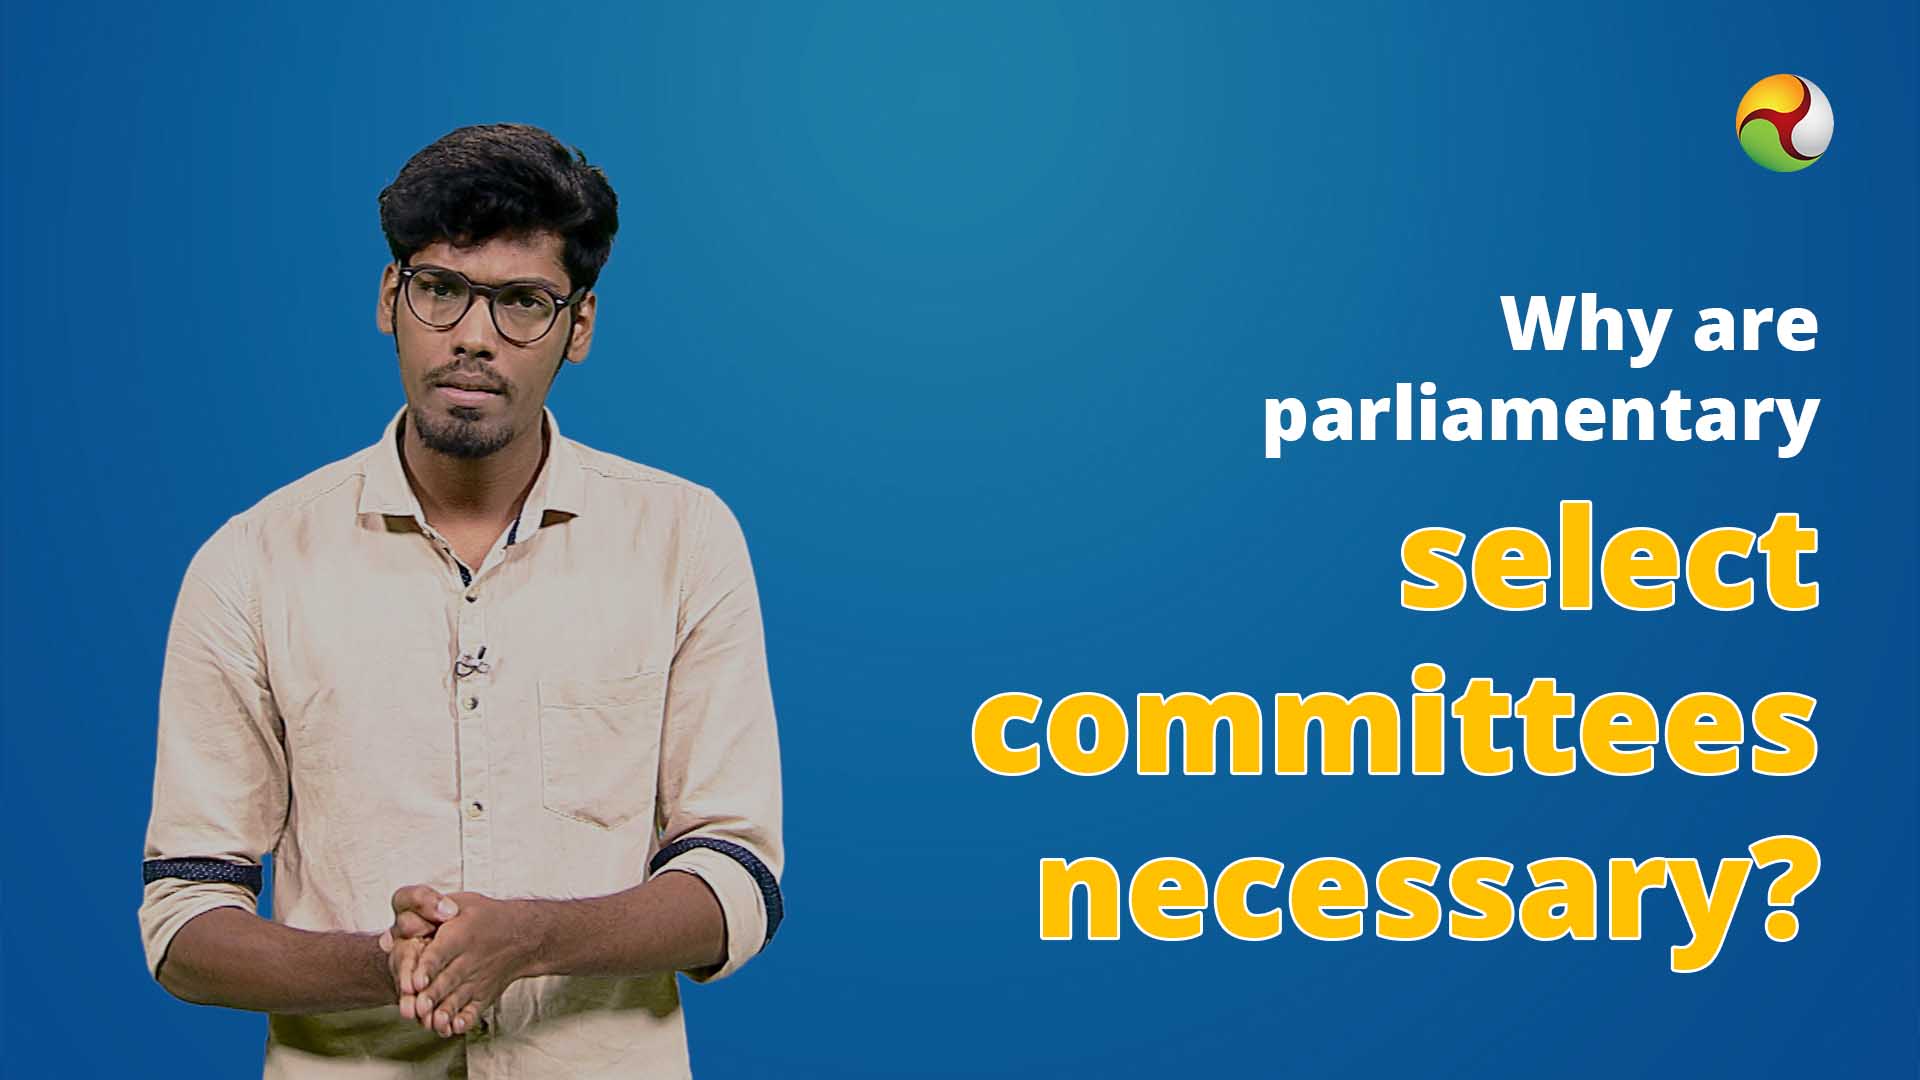 Why are parliamentary select committees necessary?